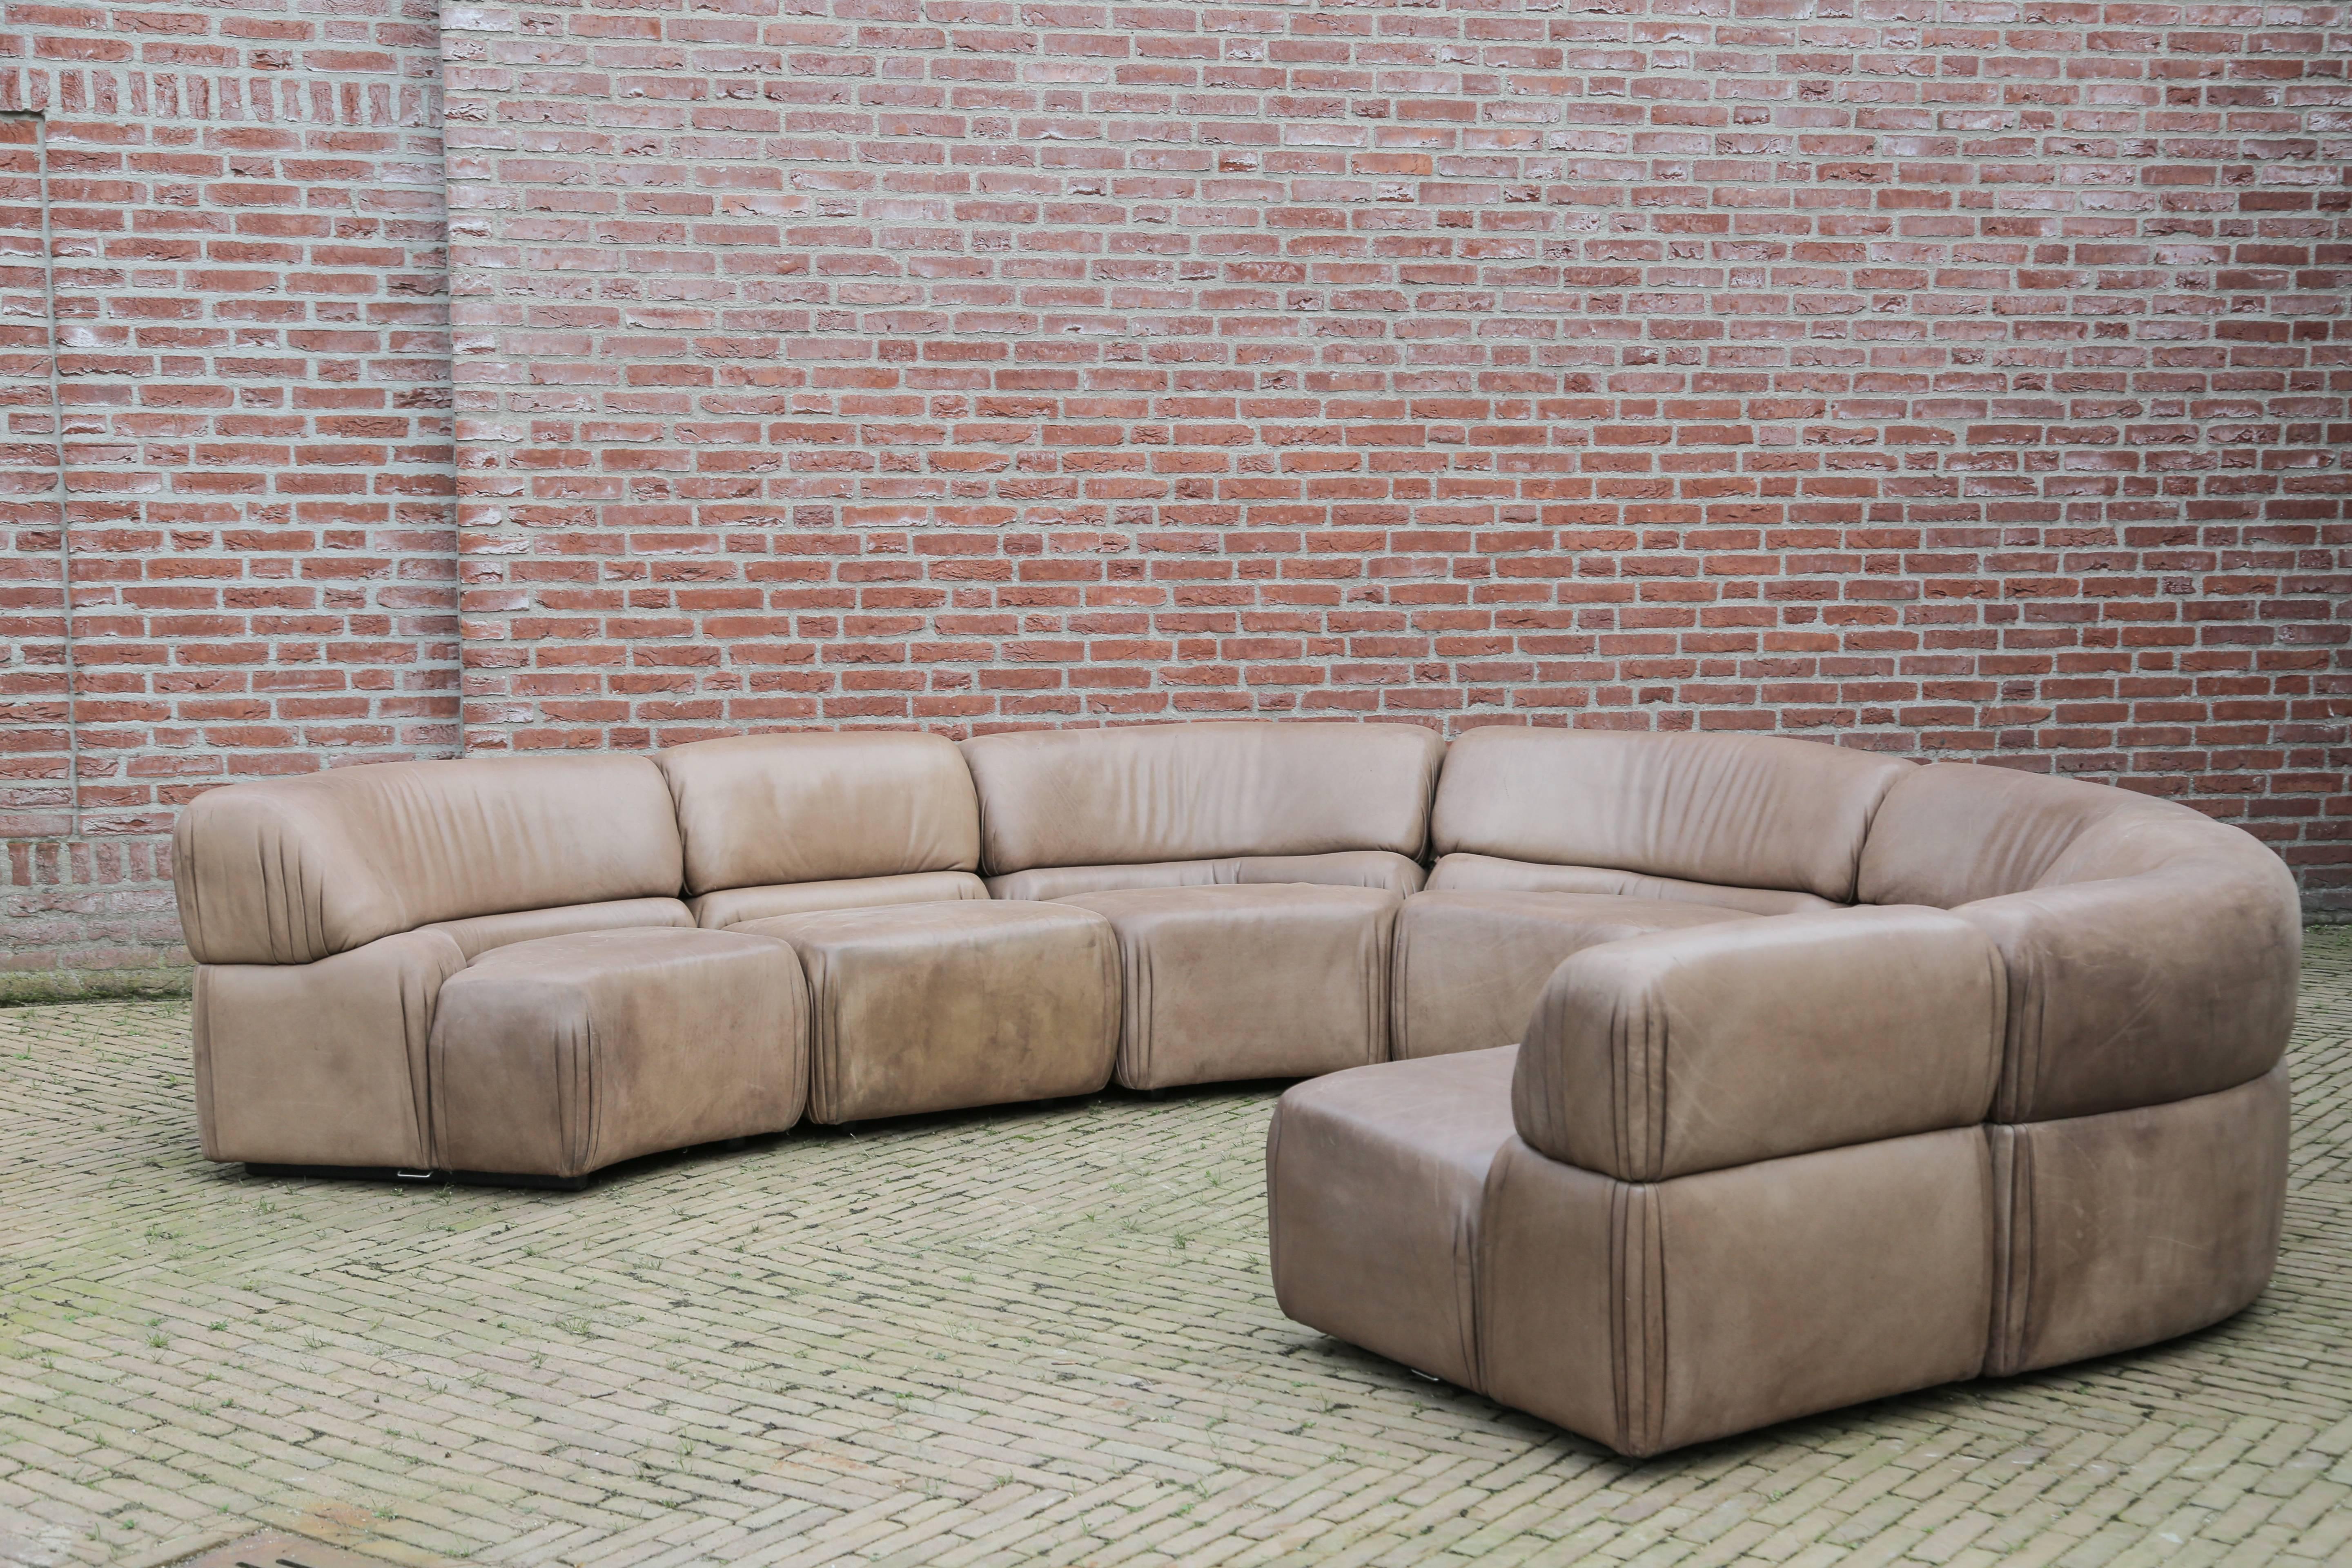 Fantastic modular sofa by De Sede. Very rare model called Cosmos,
medium brown buffalo leather with patina to the surface.

Manufacturer: De Sede.
Type: Cosmos sofa.
Year: 1970.
Country: Switzerland.
Materials: Buffalo leather.
Condition: